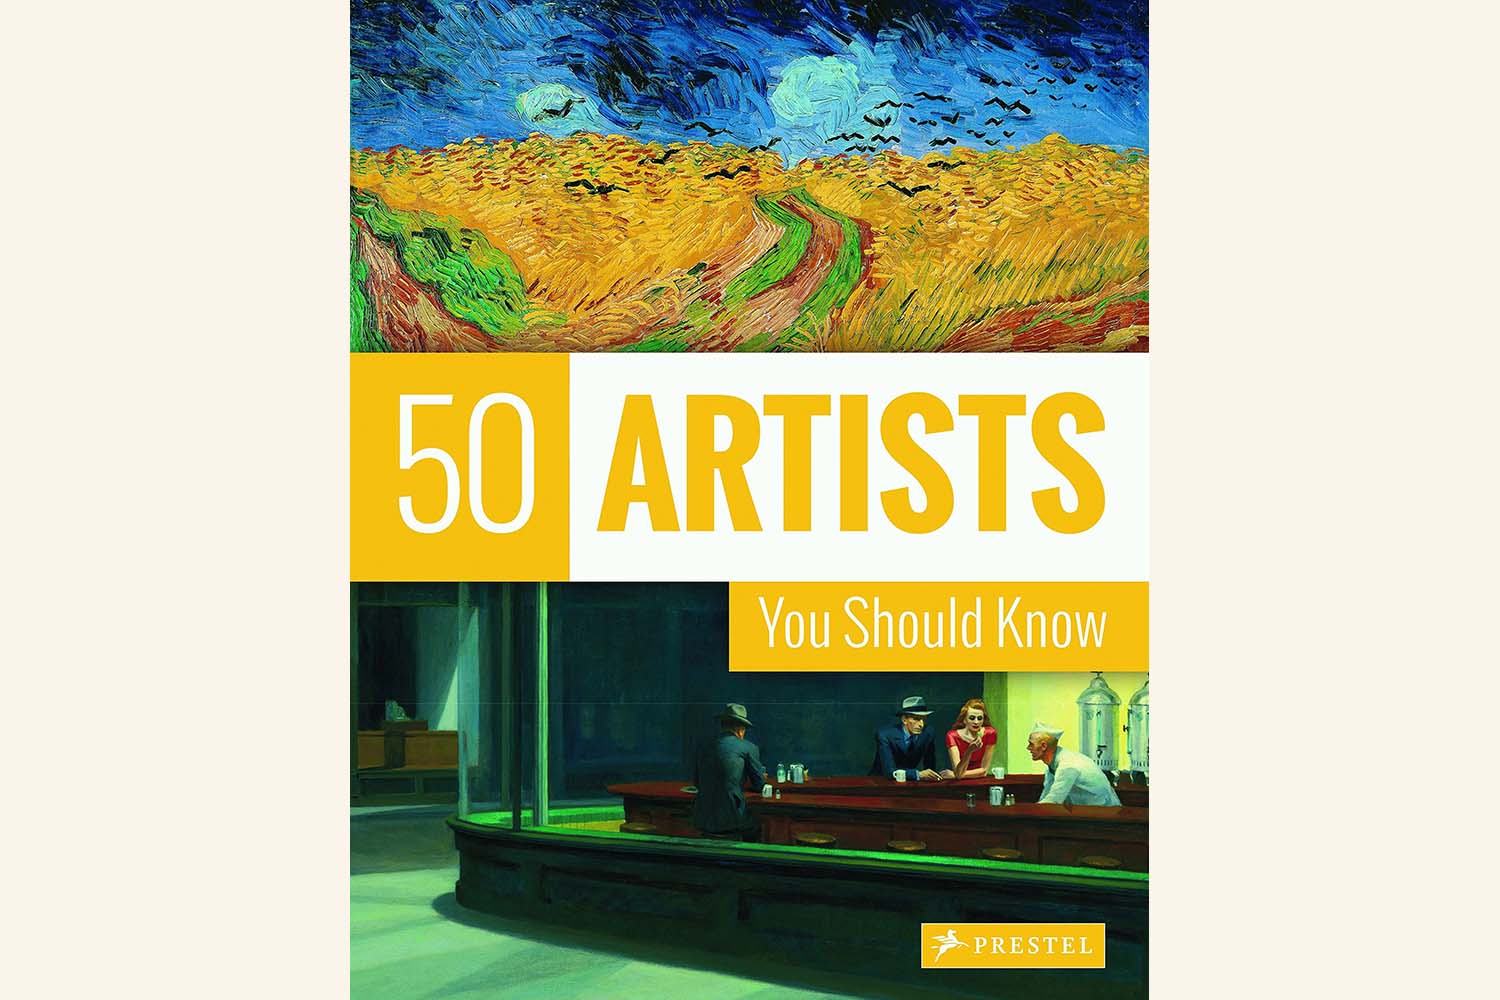 The Best Art History Books Every Art Lover Should Read: 50 Artists You Should Know, by Lars Röper and Thomas A. Koster